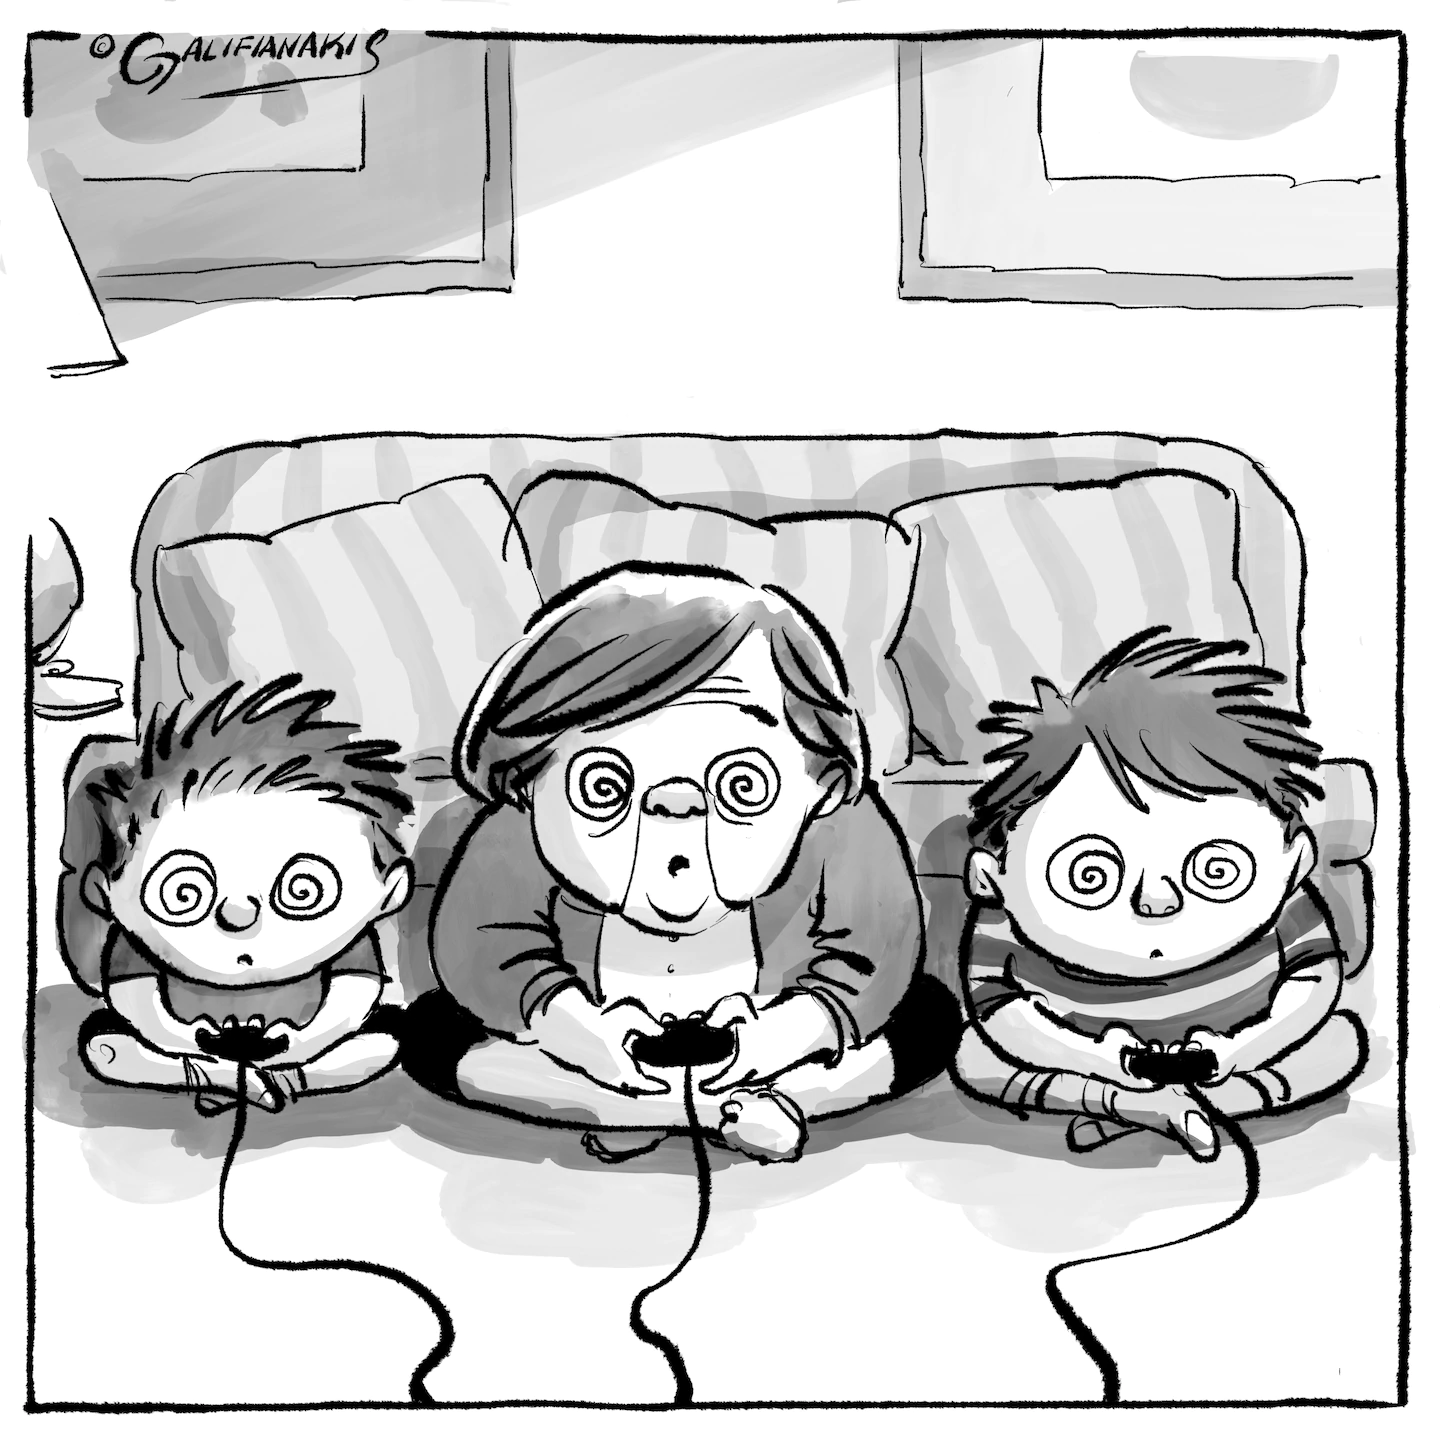 Carolyn Hax: Grandsons are addicted to video games, and she feels a call of duty